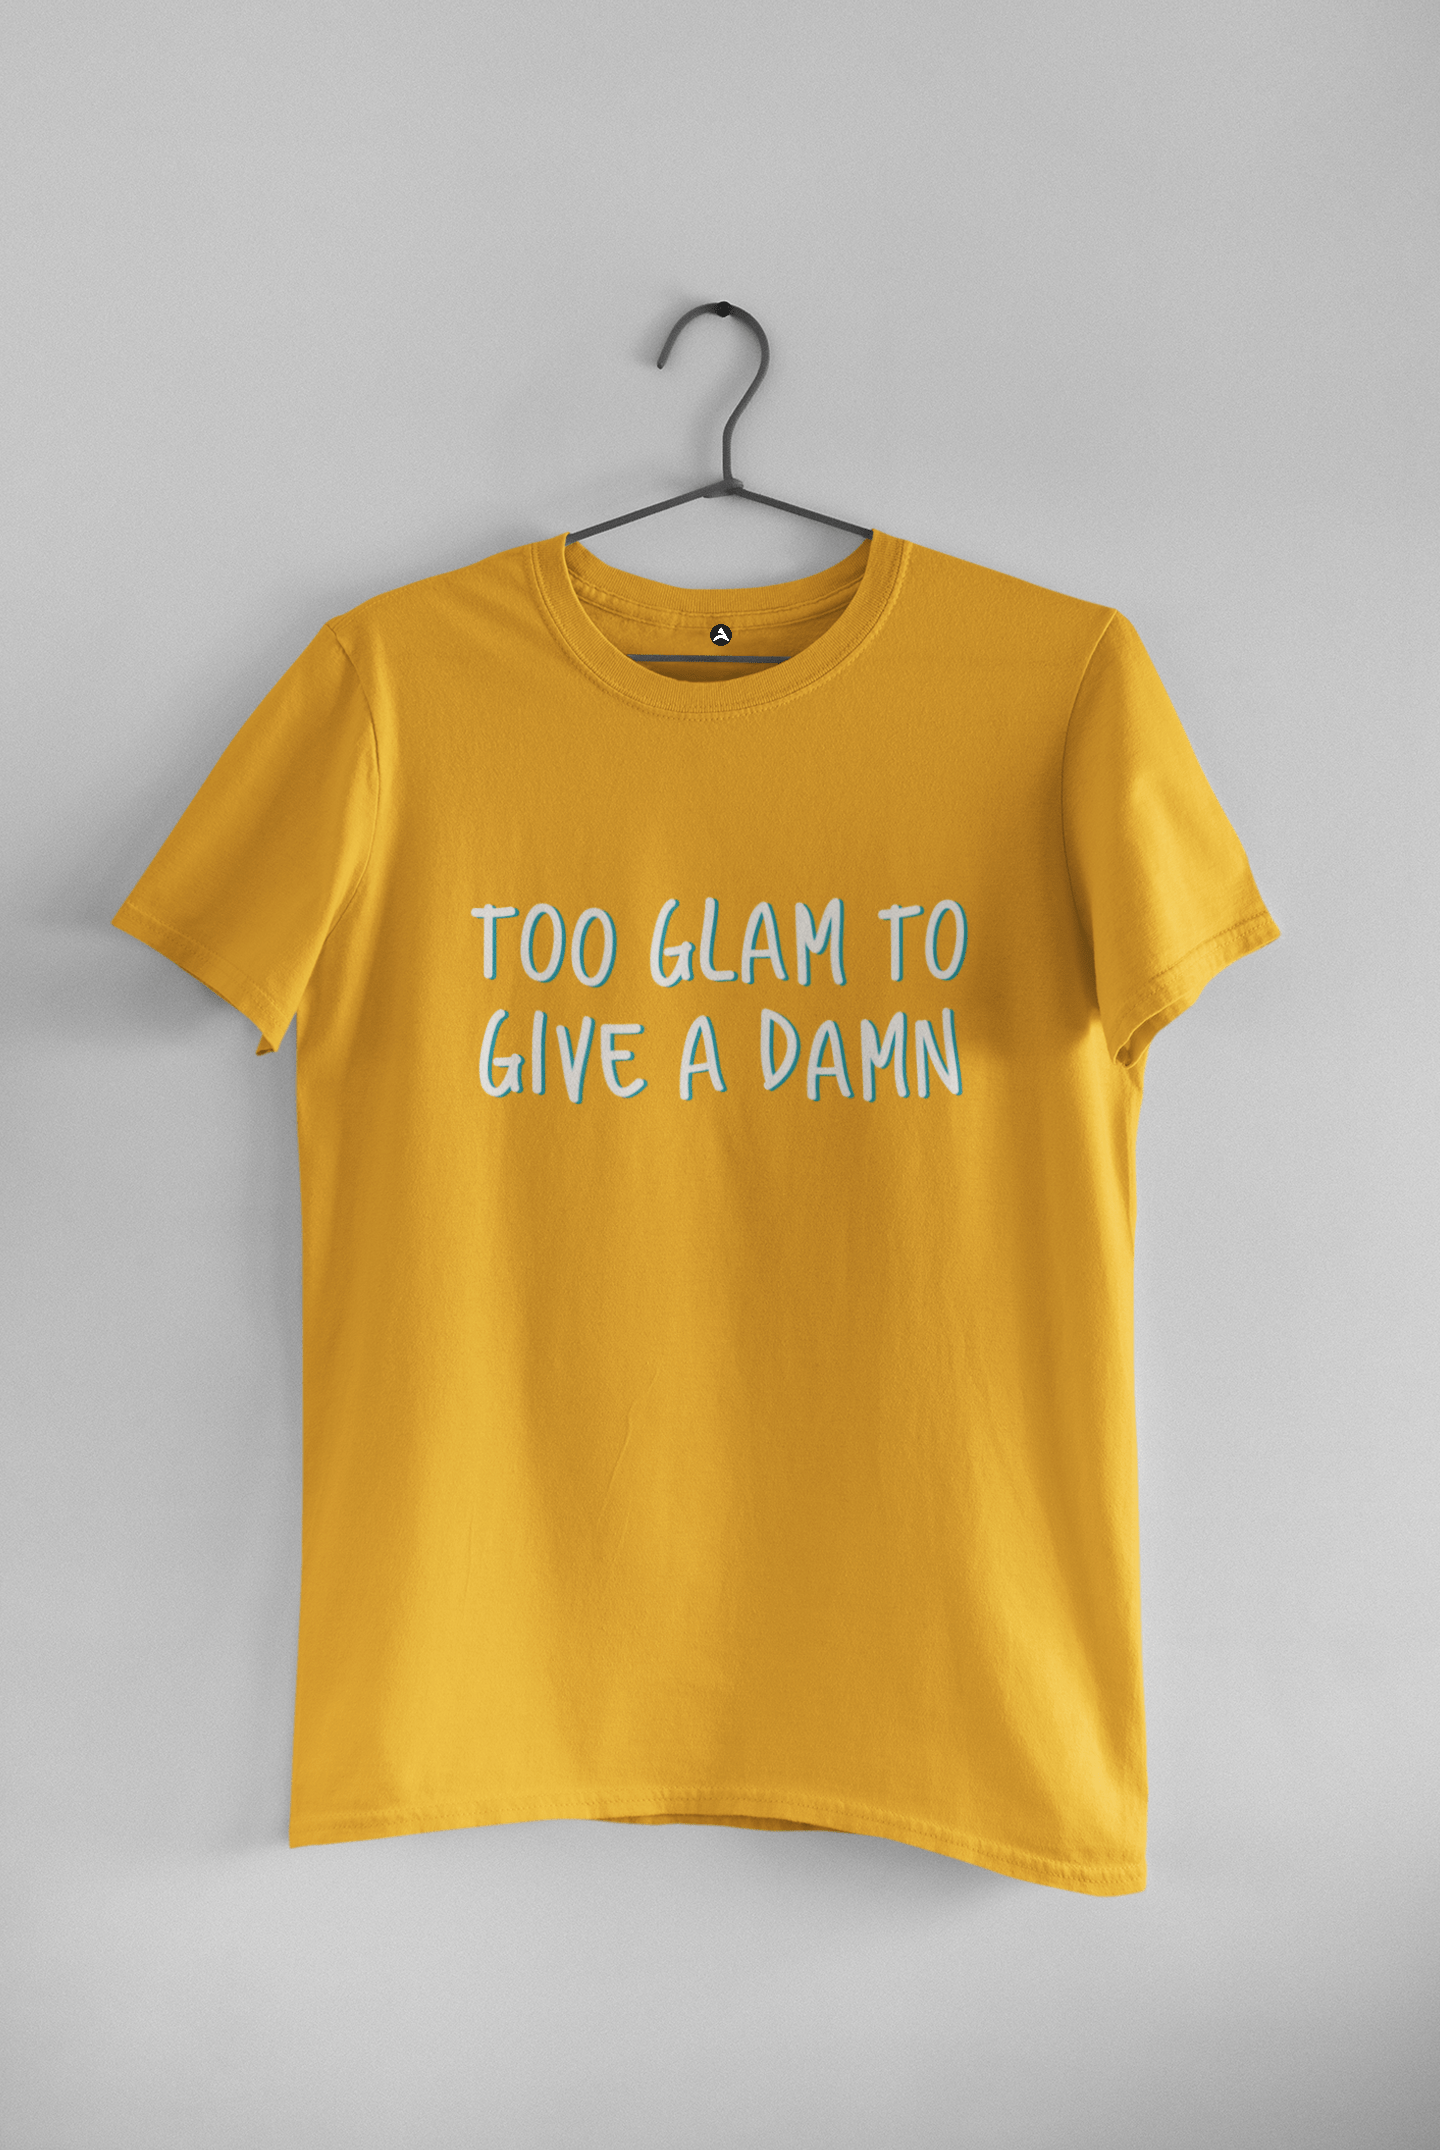 " TOO GLAM TO GIVE A DAMN " - HALF-SLEEVE T-SHIRTS YELLOW